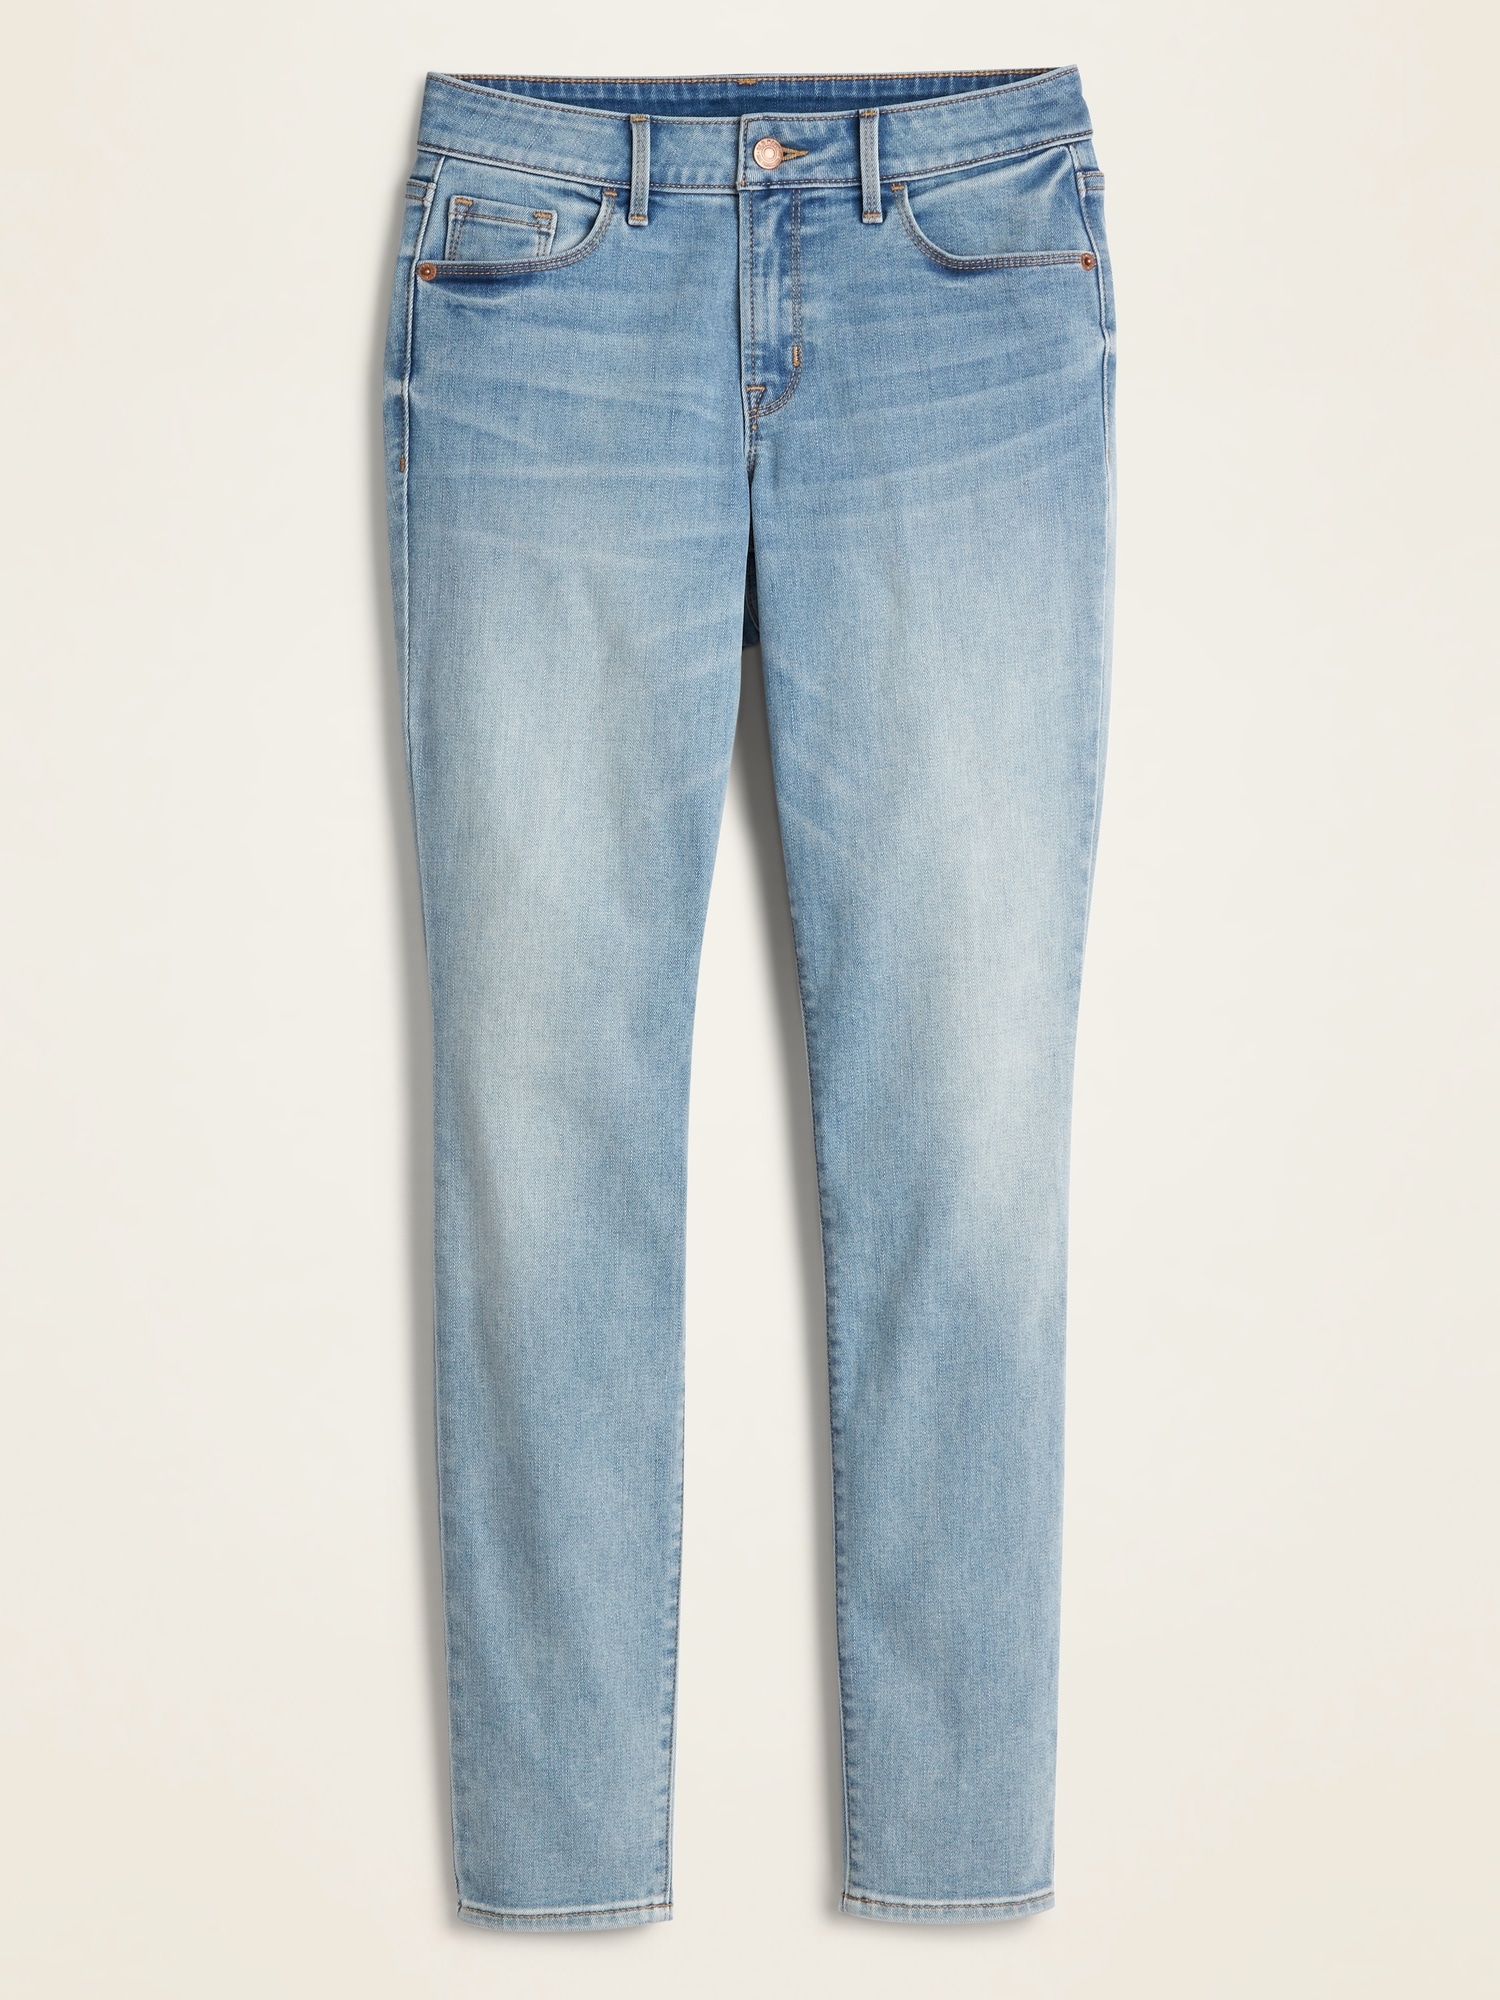 old navy pop icon skinny jeans